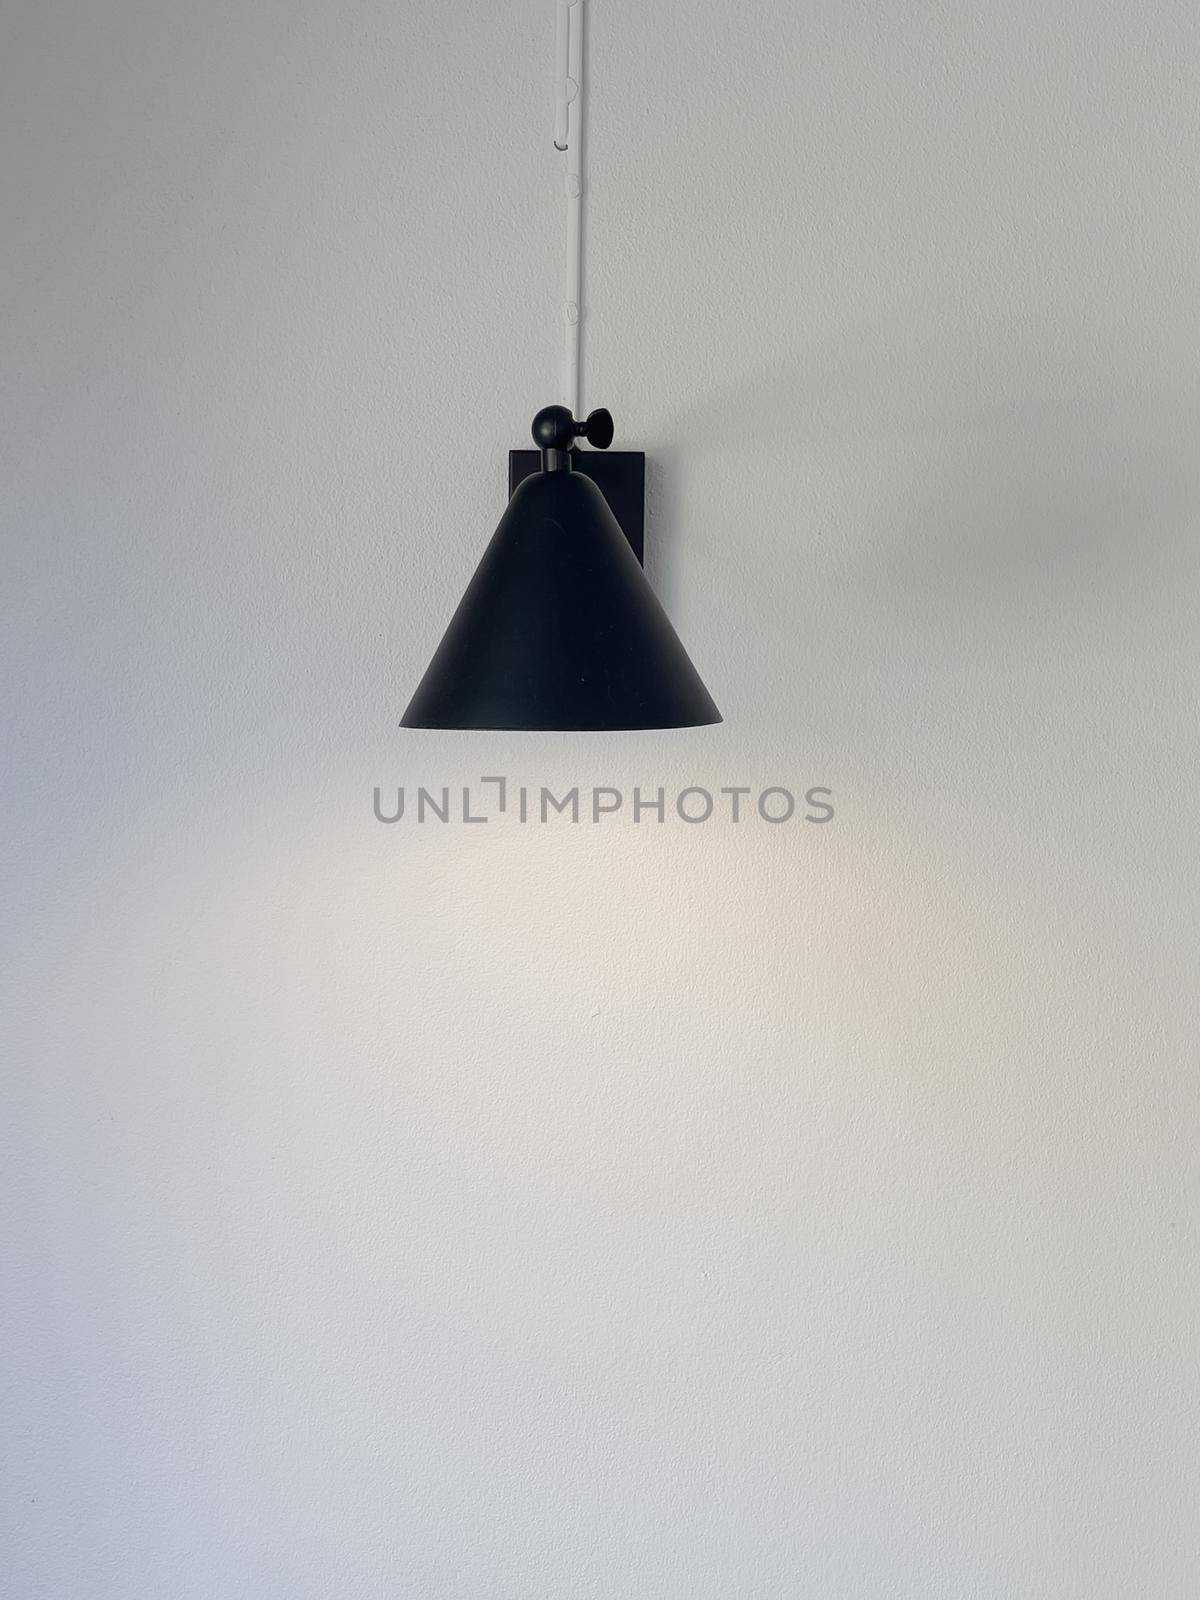 Black lamp hanging from the ceiling by punsayaporn